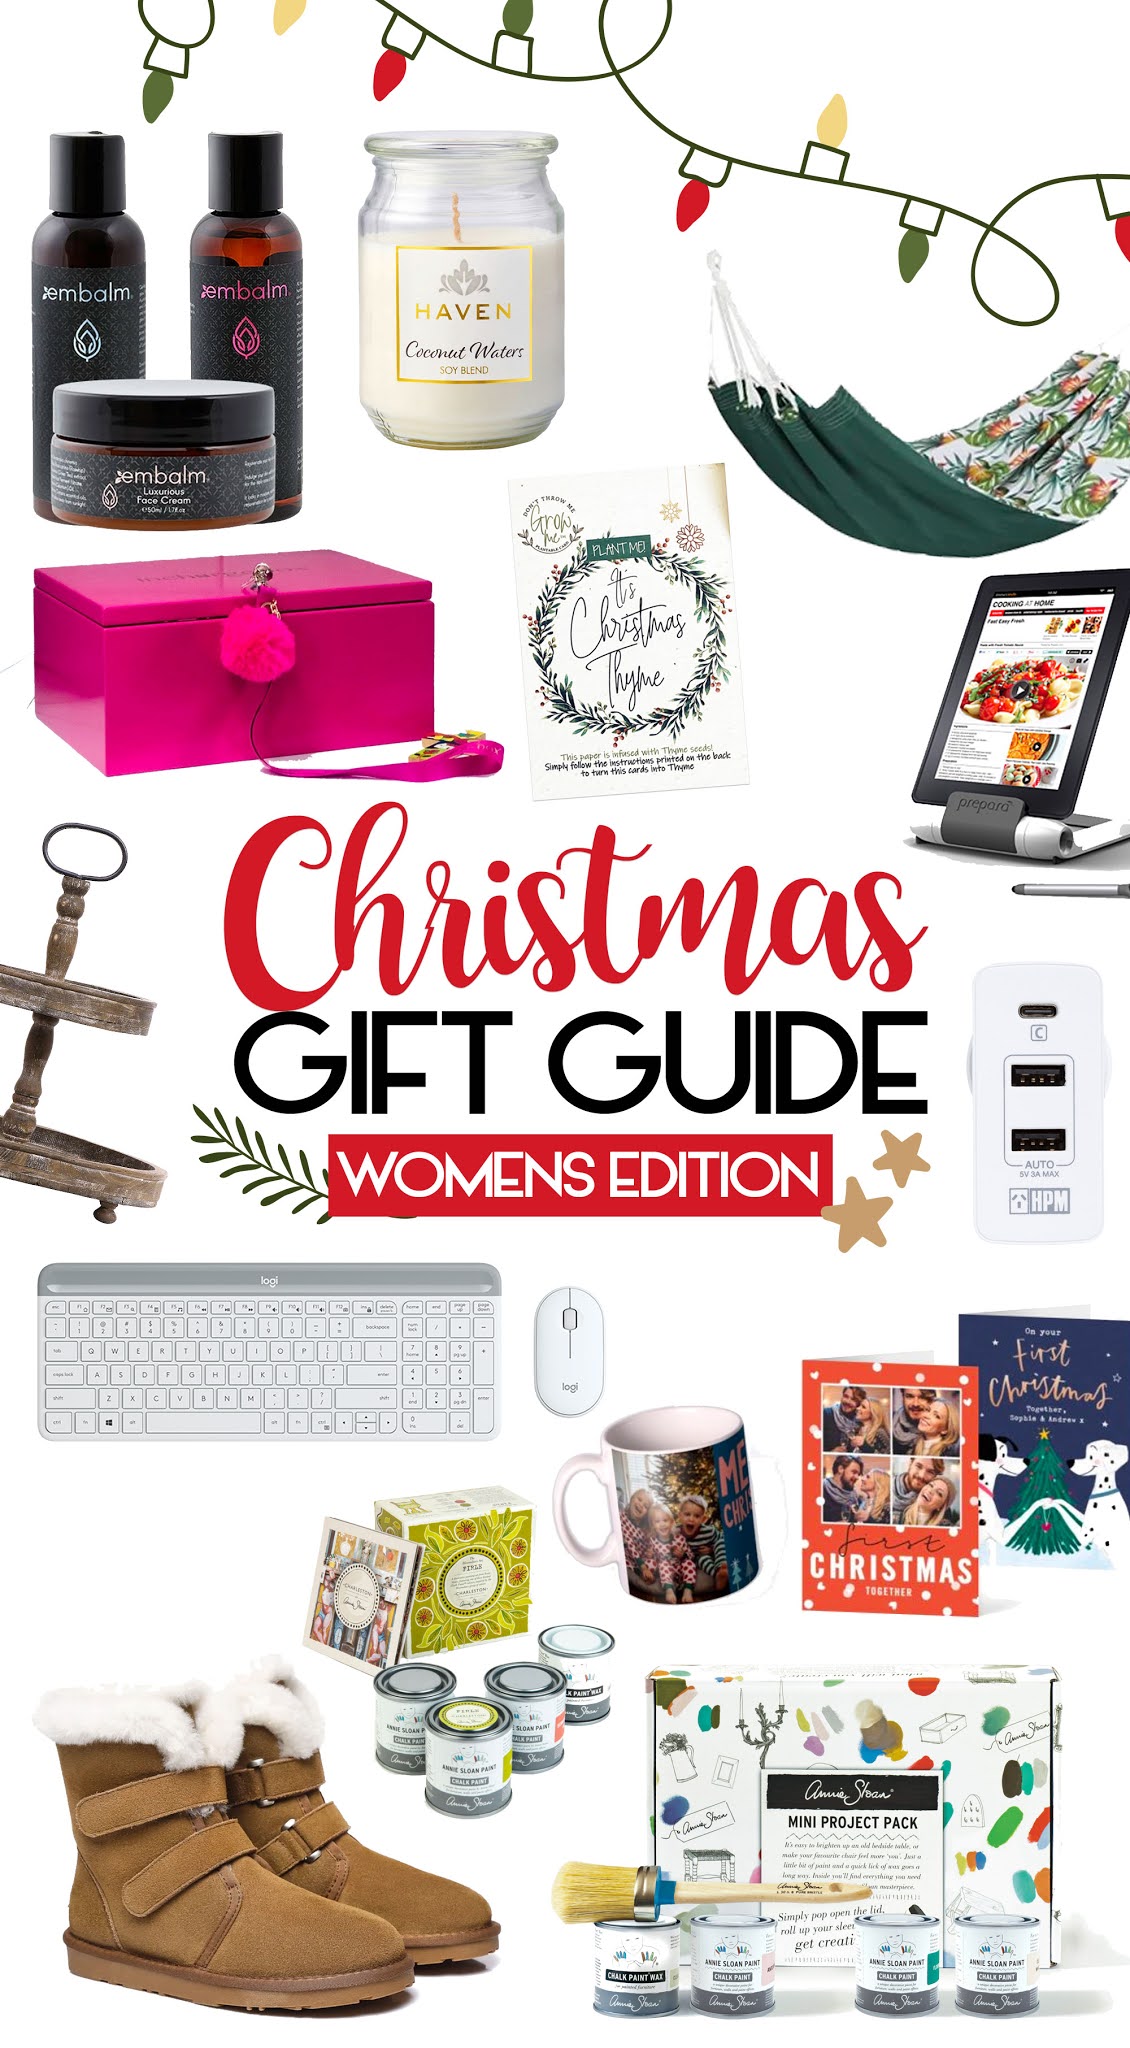 Gifts for Her Ideas Guide - Cute Gift Ideas for Women